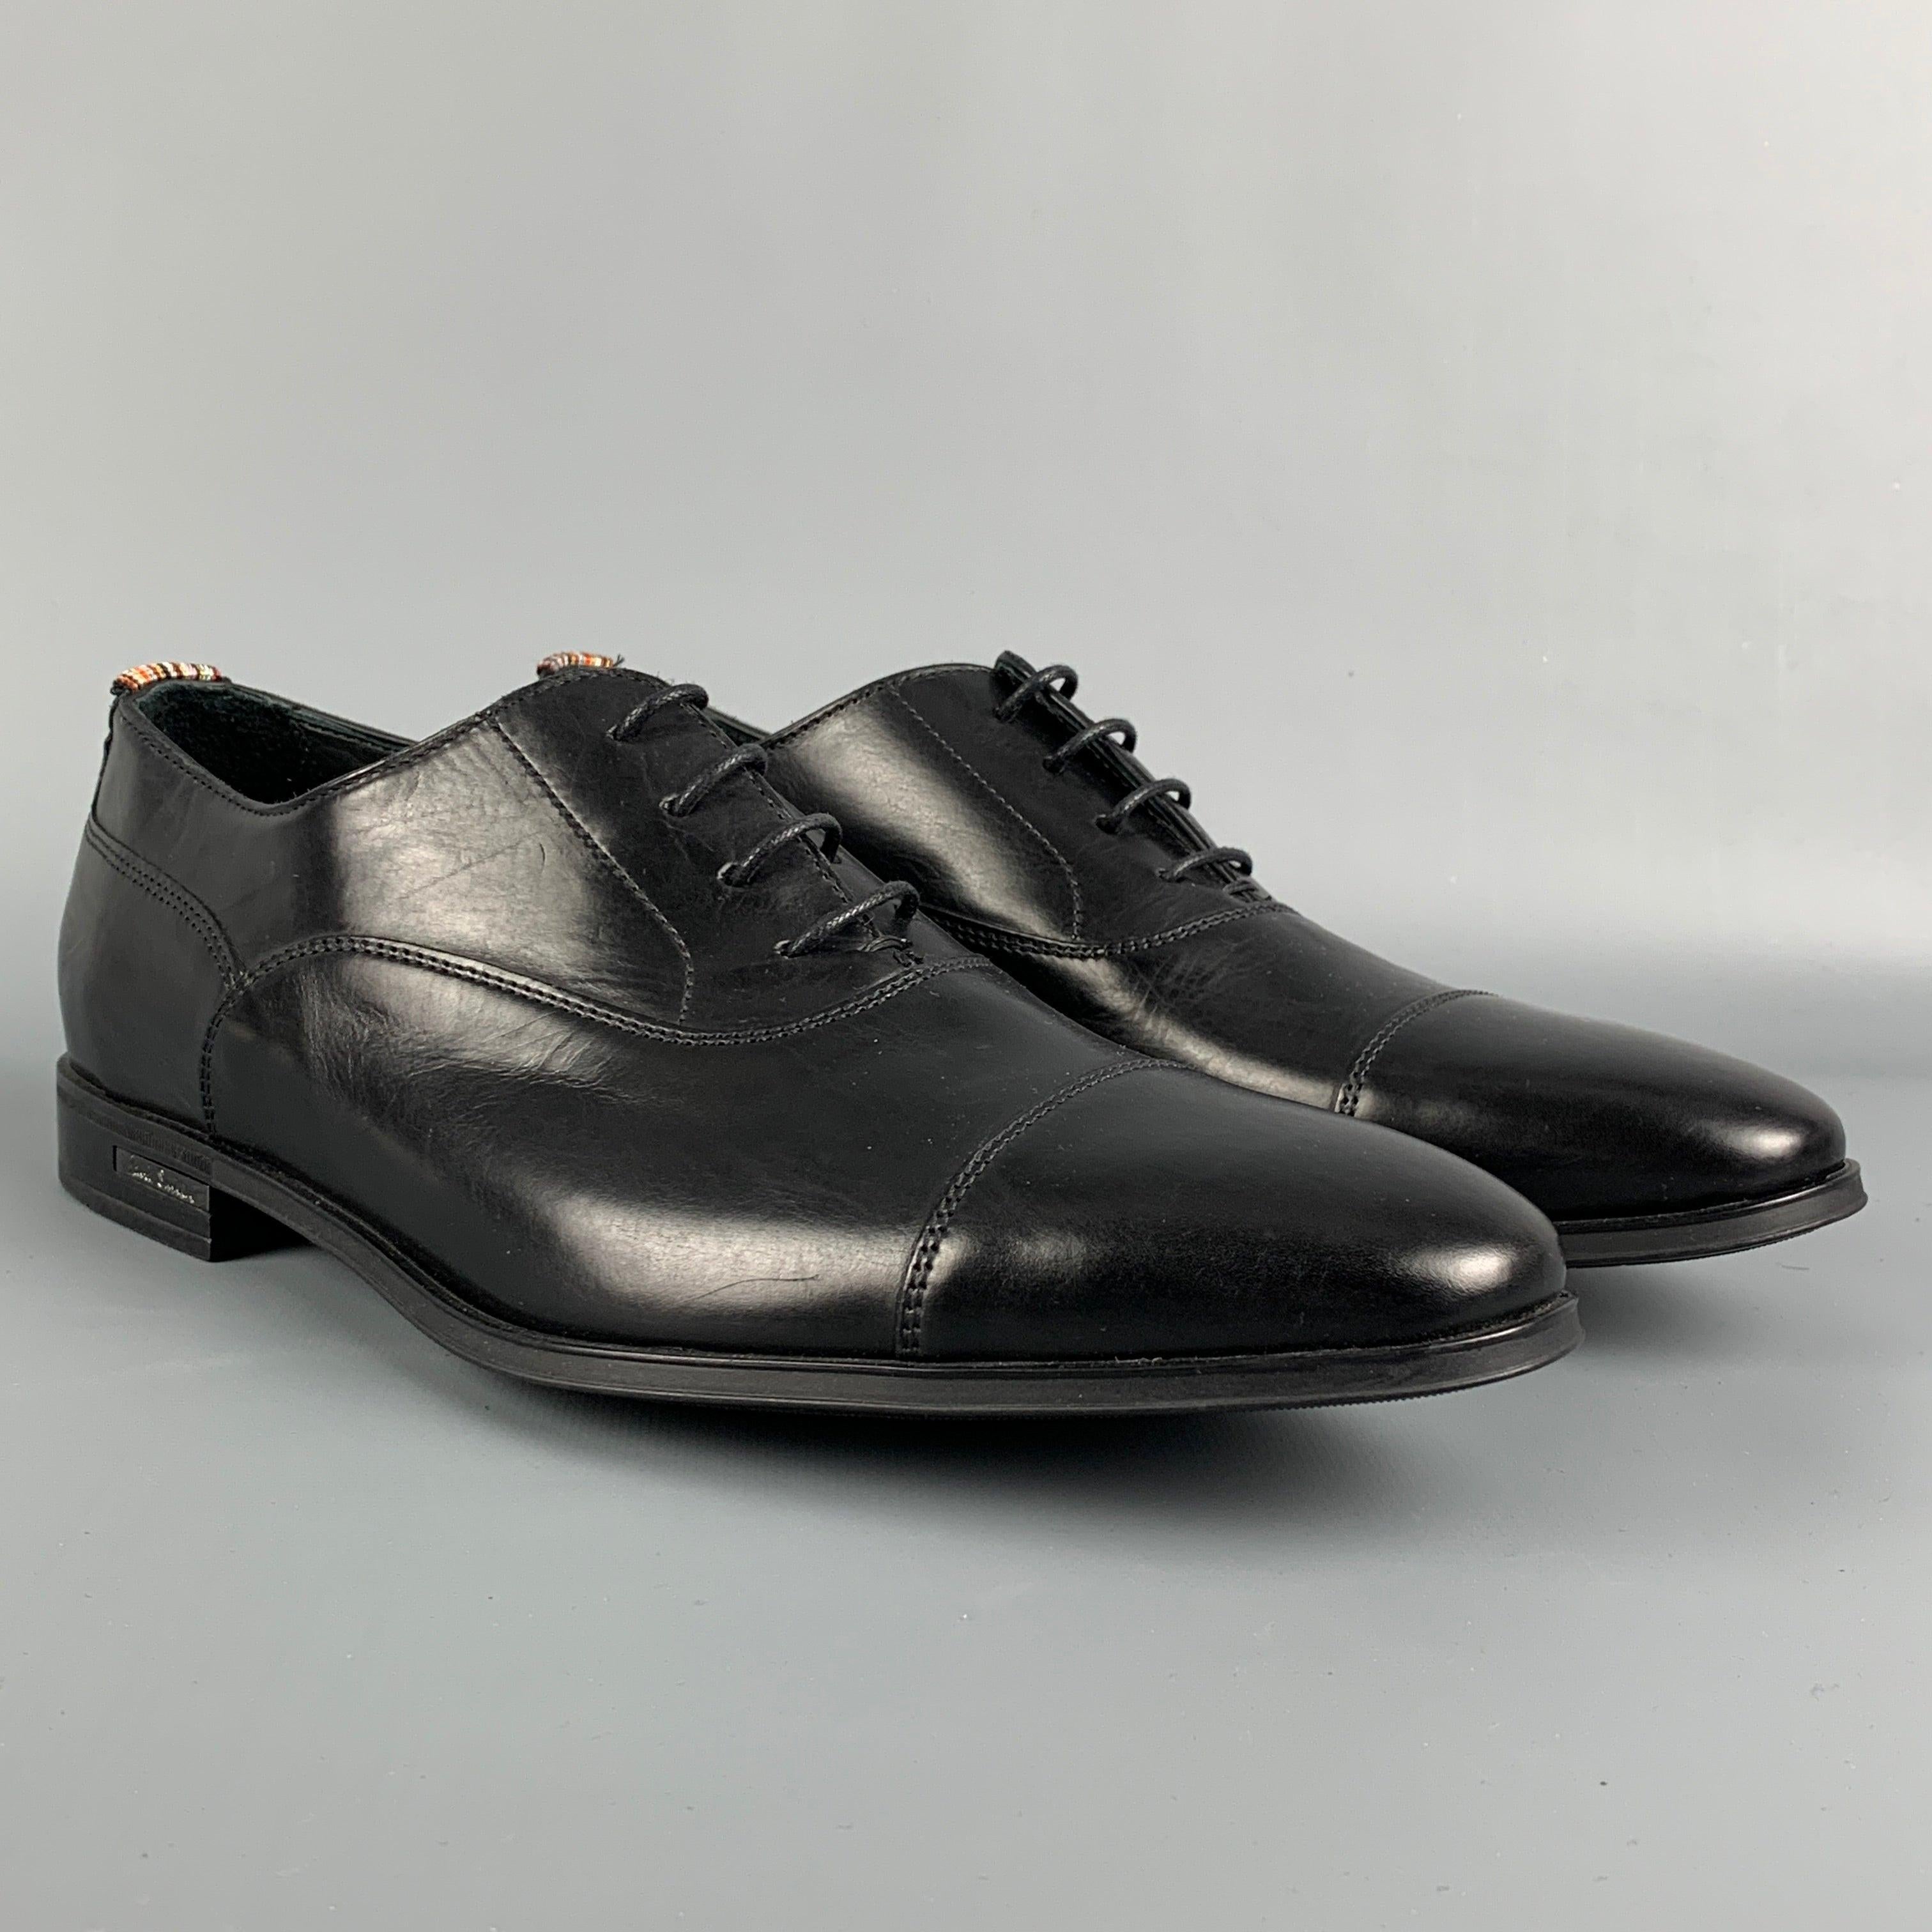 PAUL SMITH shoes comes in a black leather featuring a cap toe and a lace up closure. Made in Italy.
Very Good
Pre-Owned Condition. 

Marked:  V204 7 41Outsole: 11.25 inches  x 4 inches 
  
  
 
Reference: 113839
Category: Lace Up Shoes
More Details
